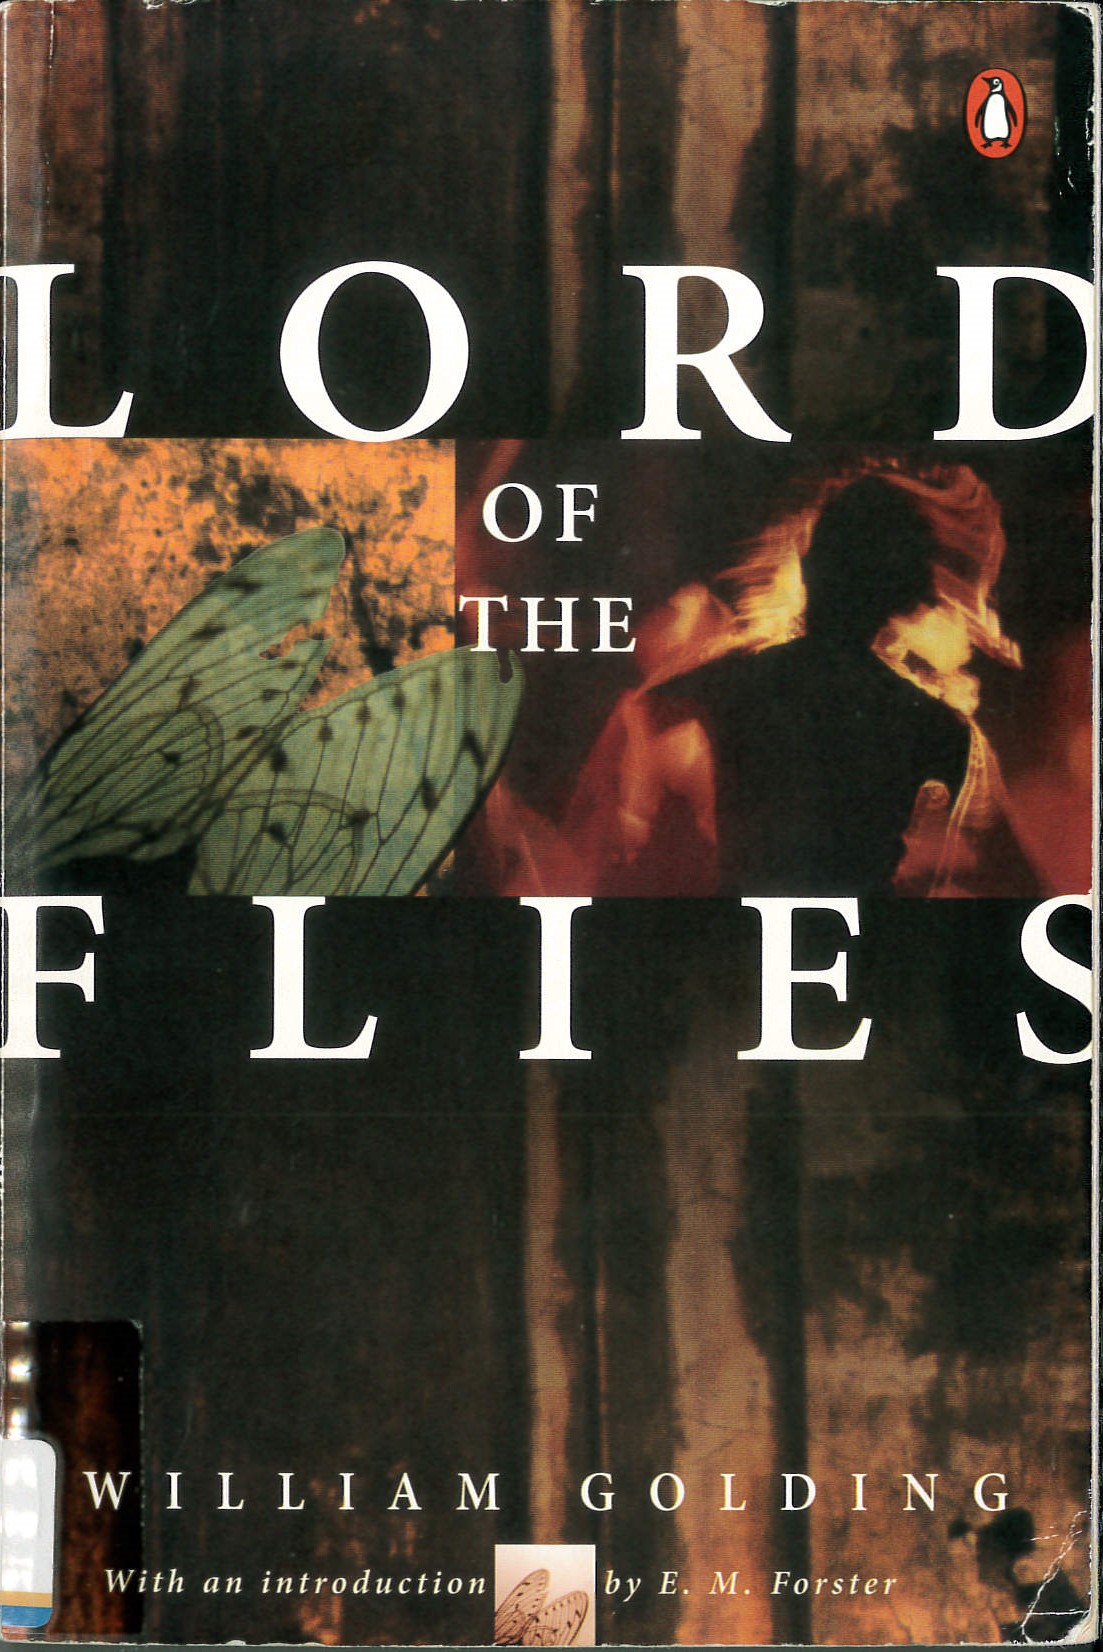 Lord of the flies /